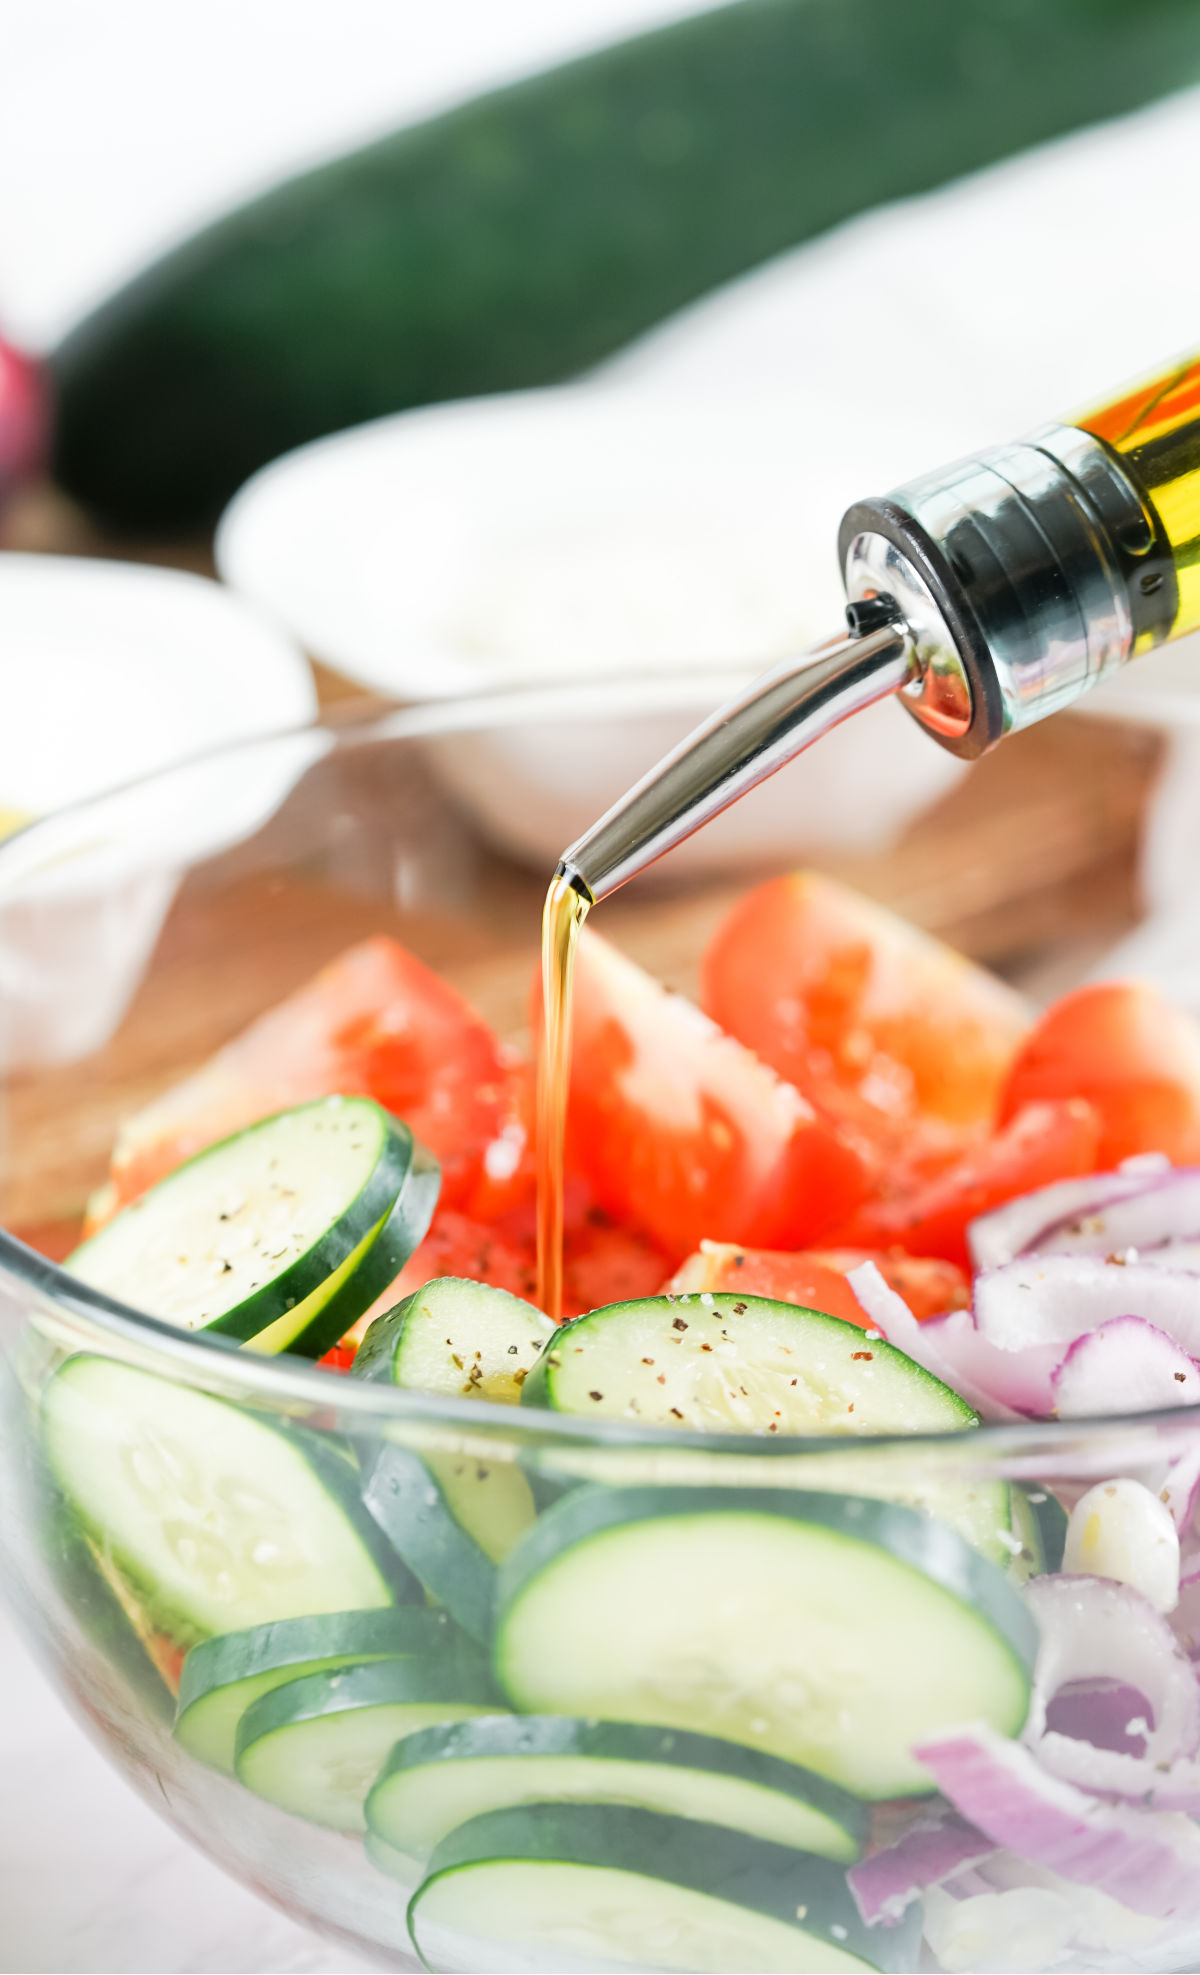 Olive oil being drizzled over cucumber salad.